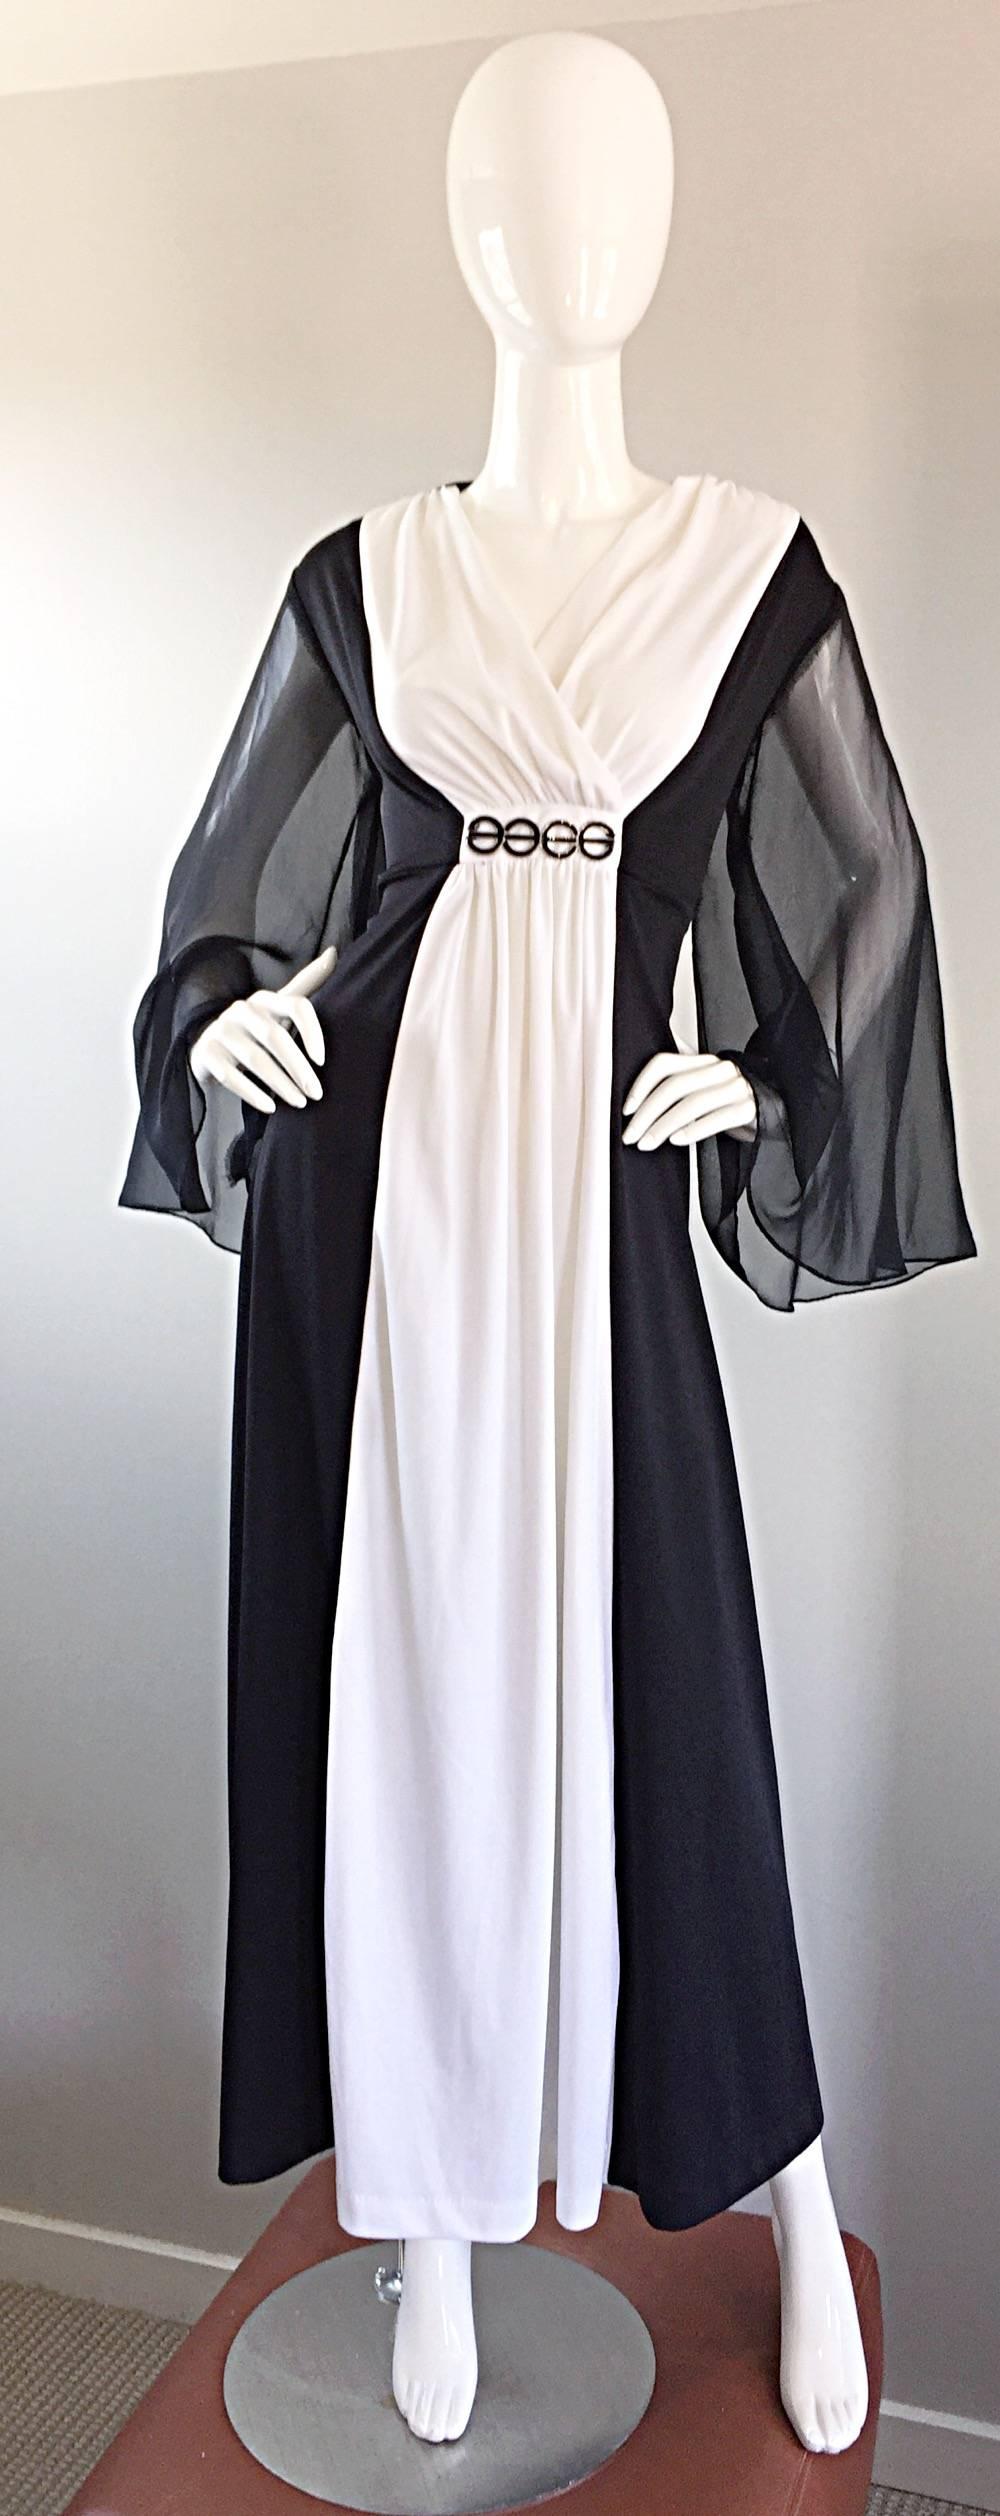 Incredible vintage 1970s black and white color blocked Grecian maxi dress, with black chiffon angel sleeves! Wonderful pleating in all the right places. Attached silver and black metal appliqué at waist. Looks amazing on! Full metal zipper up the